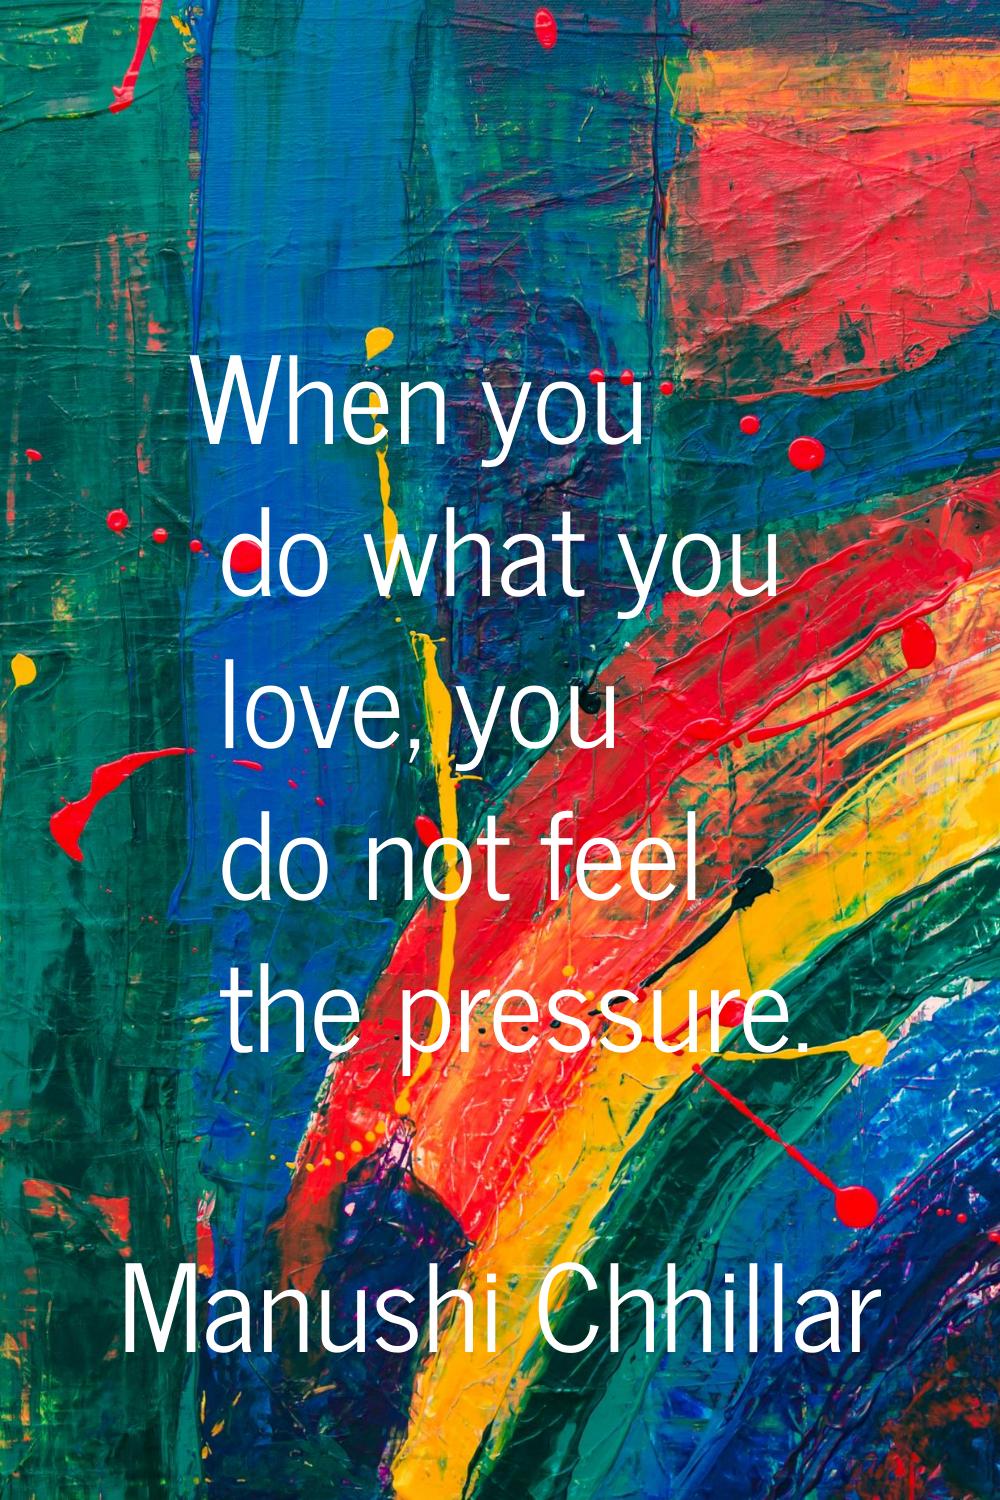 When you do what you love, you do not feel the pressure.